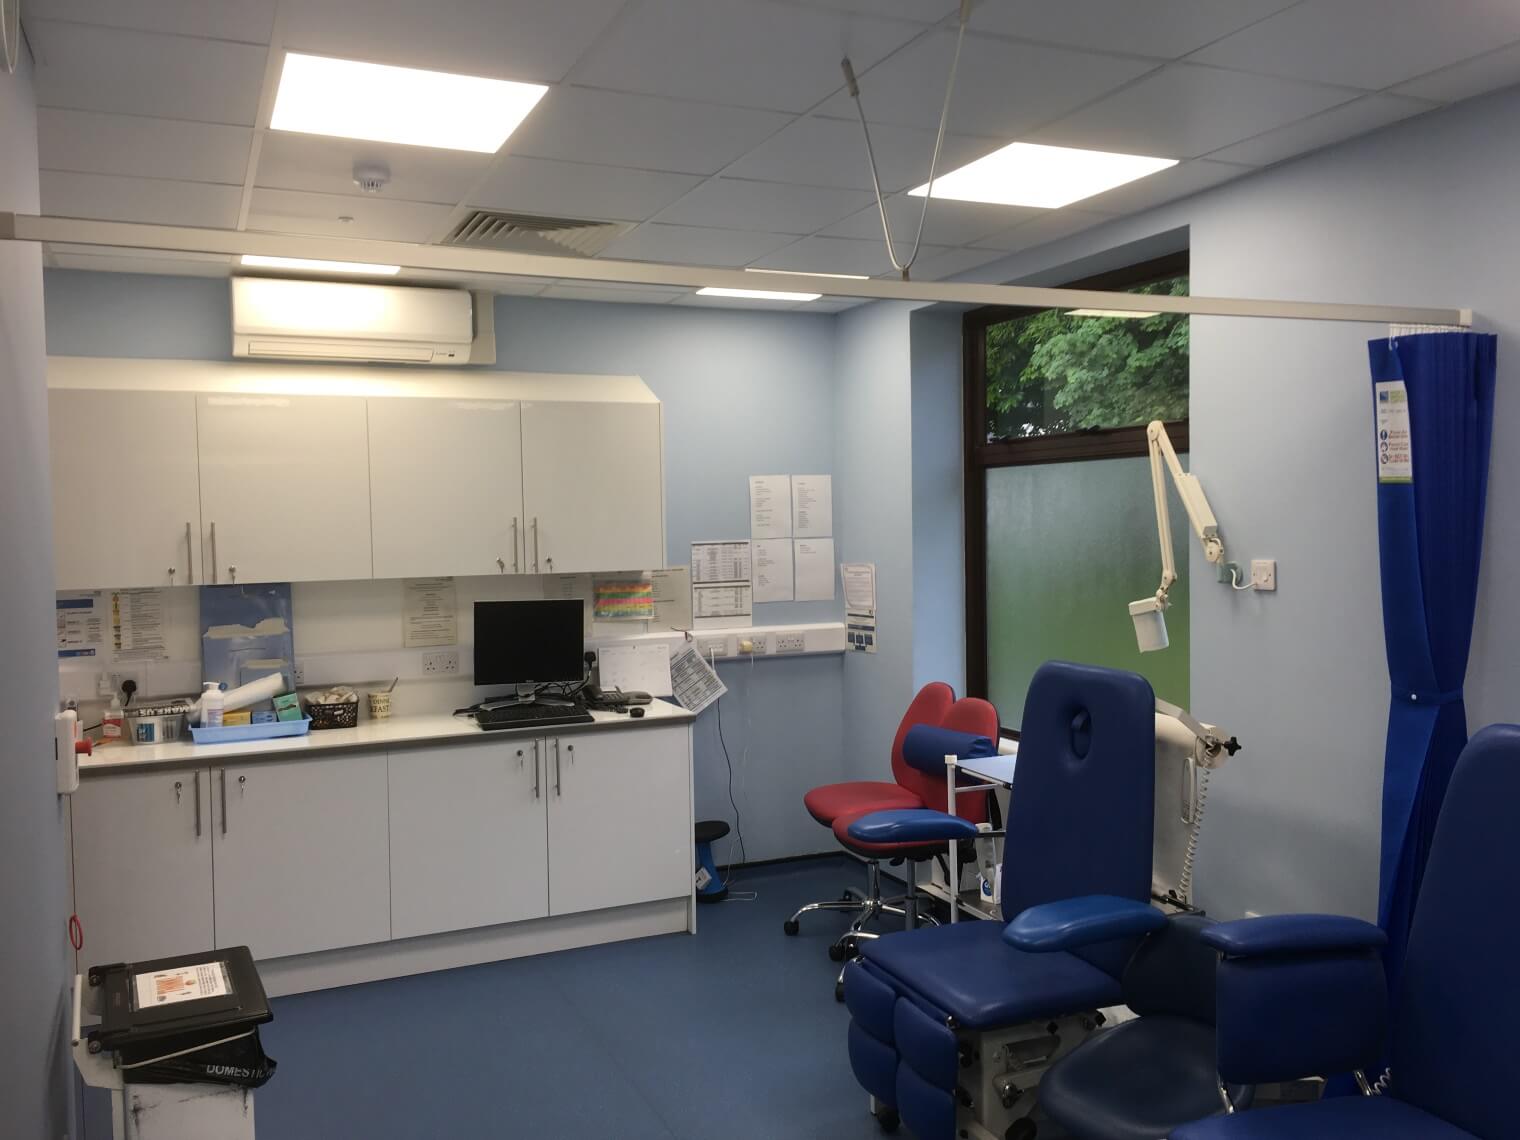 Refurbishing underutilised space and adjoining space to deliver broader healthcare services